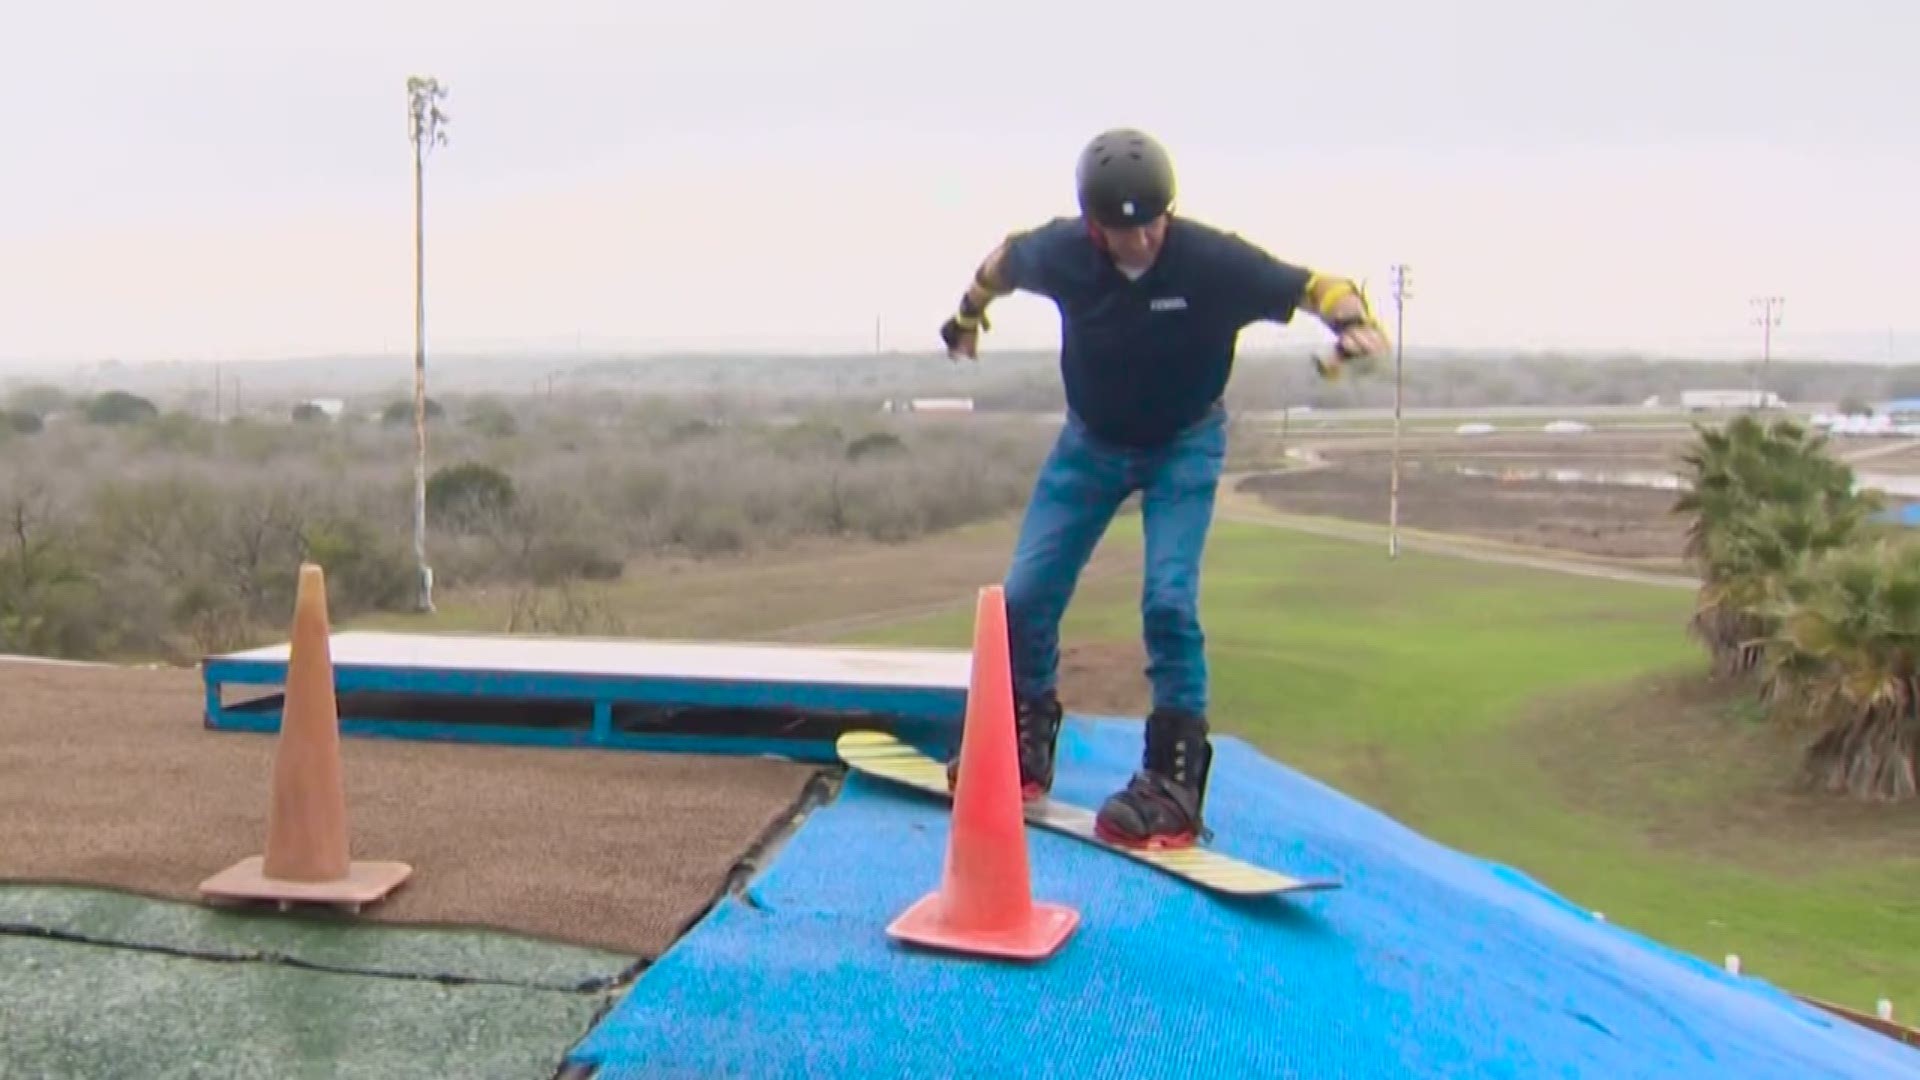 Want to learn how to snowboard? In this week's Texas Outdoors, we take you to a place in New Braunfels that's teaching Texans how.